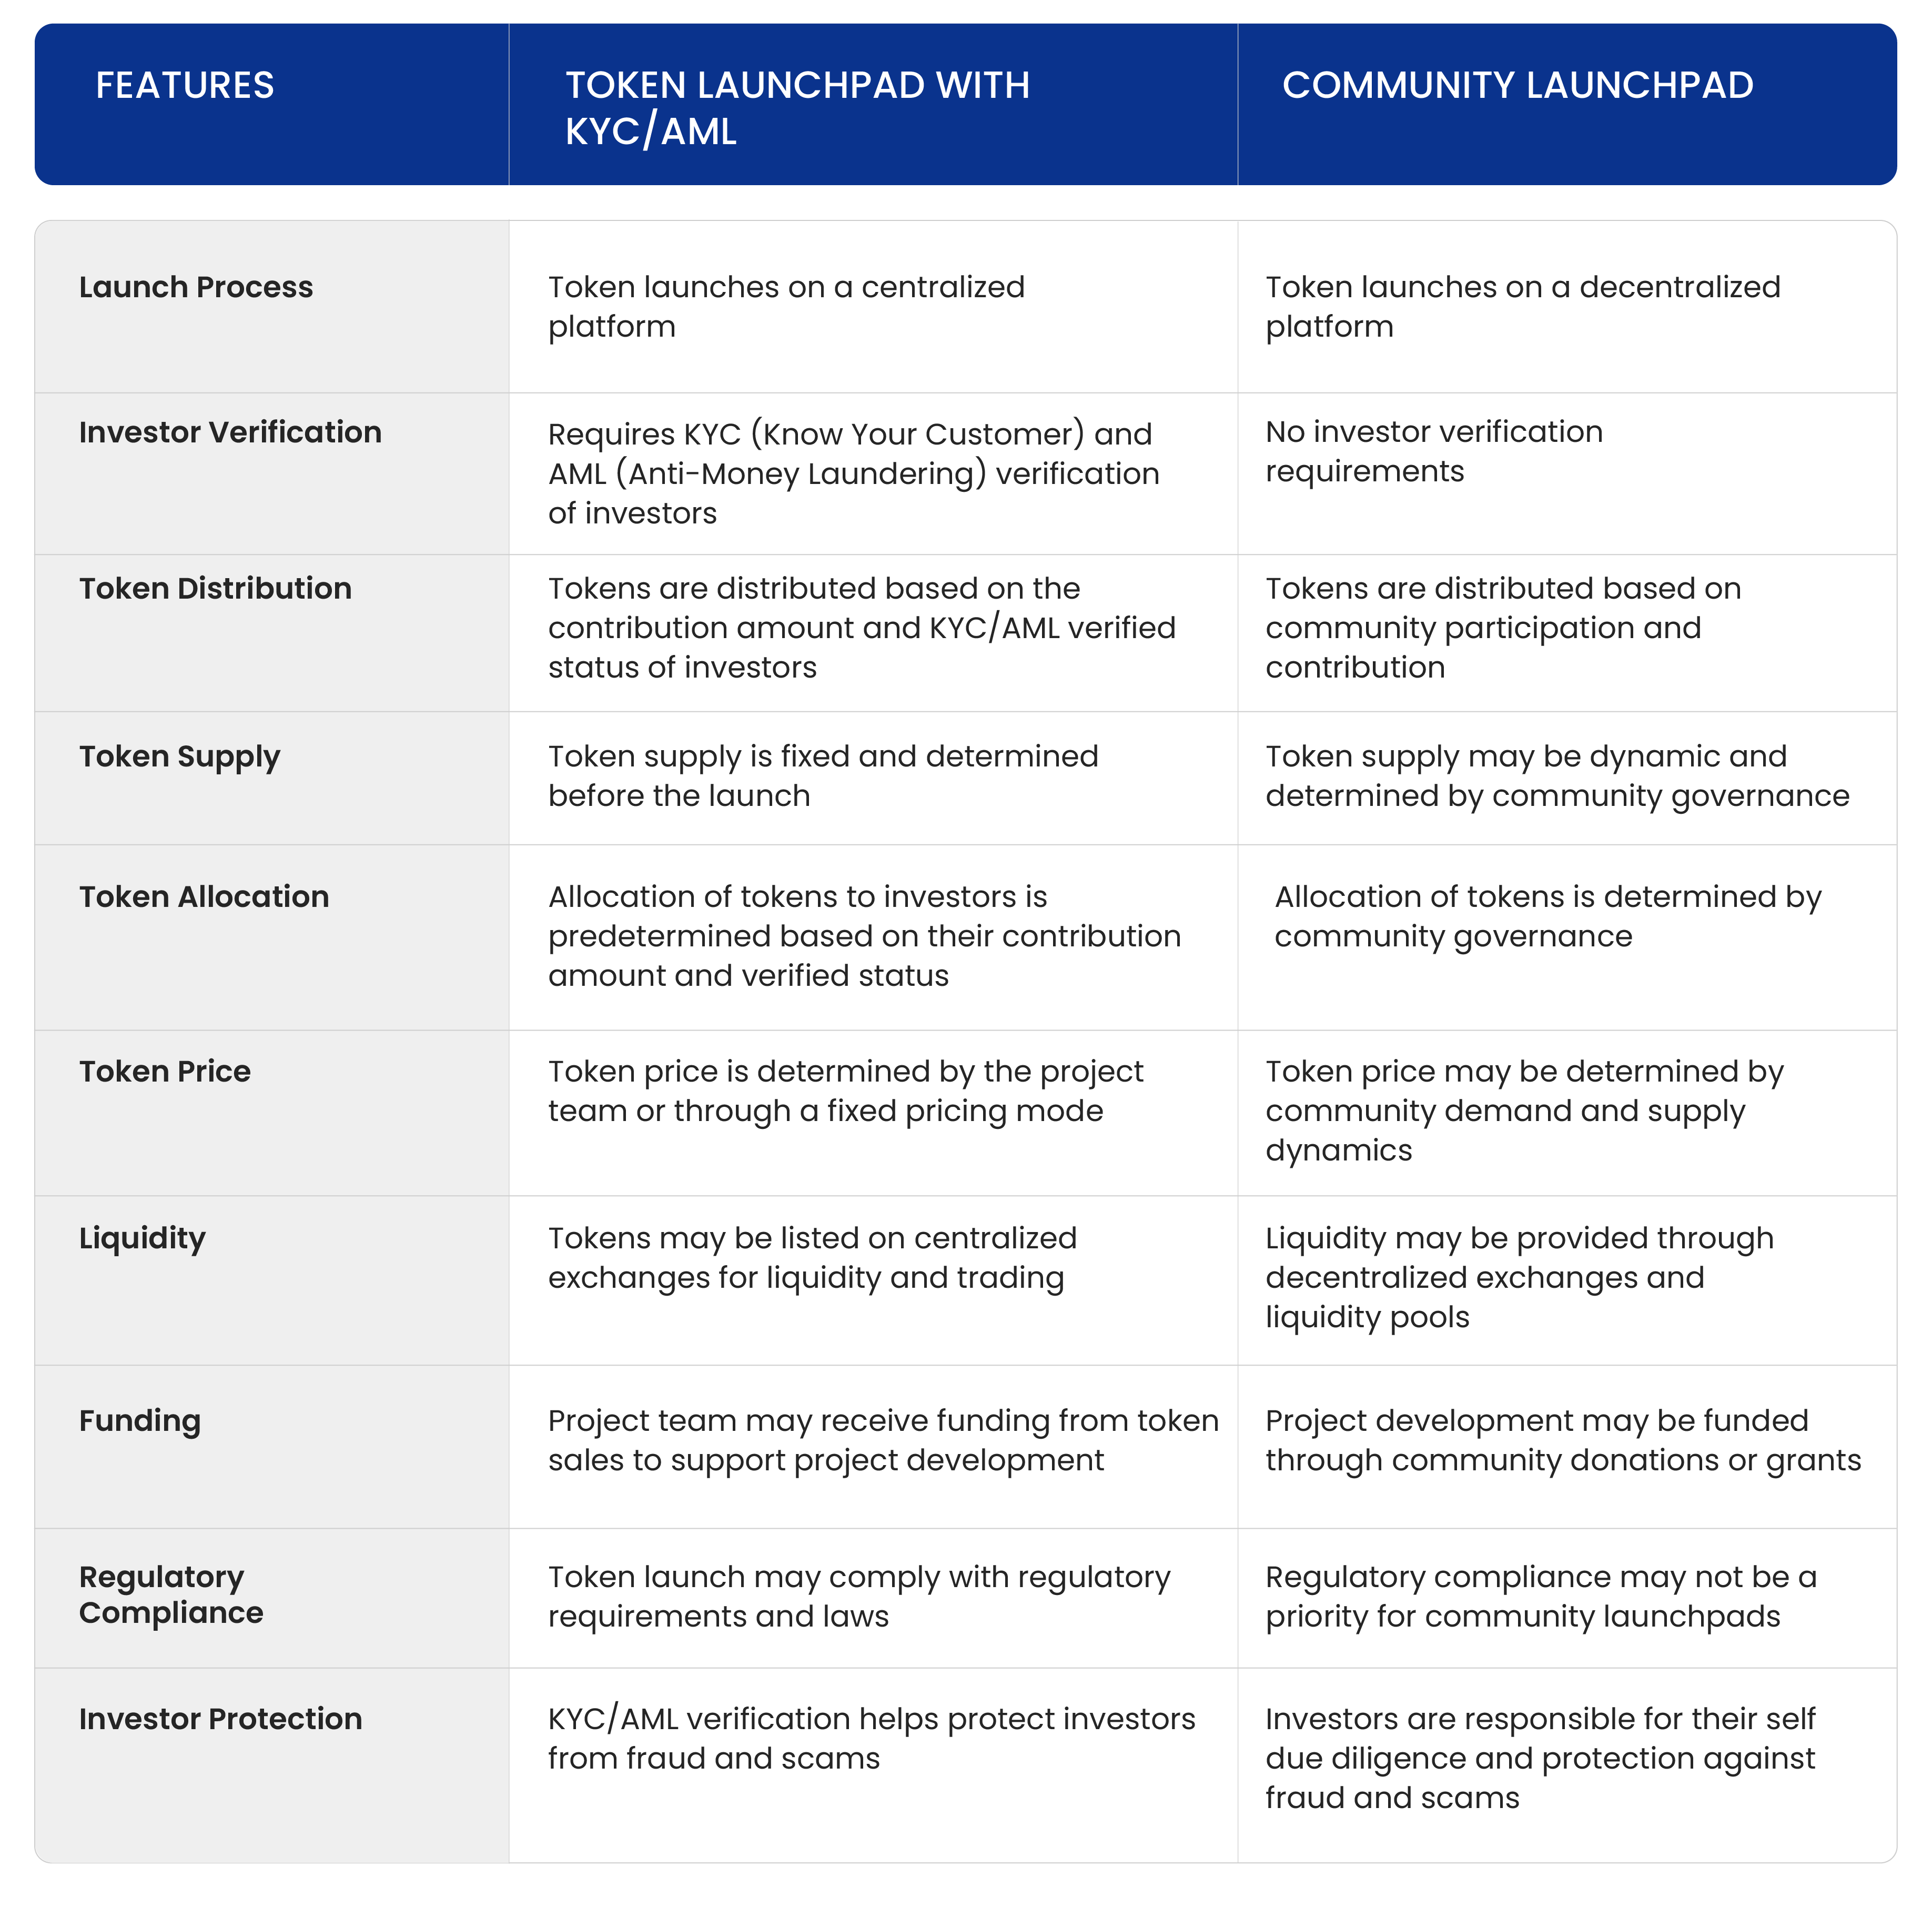 Comparison Between Token Launchpad with KYC/AML and Community Launchpad